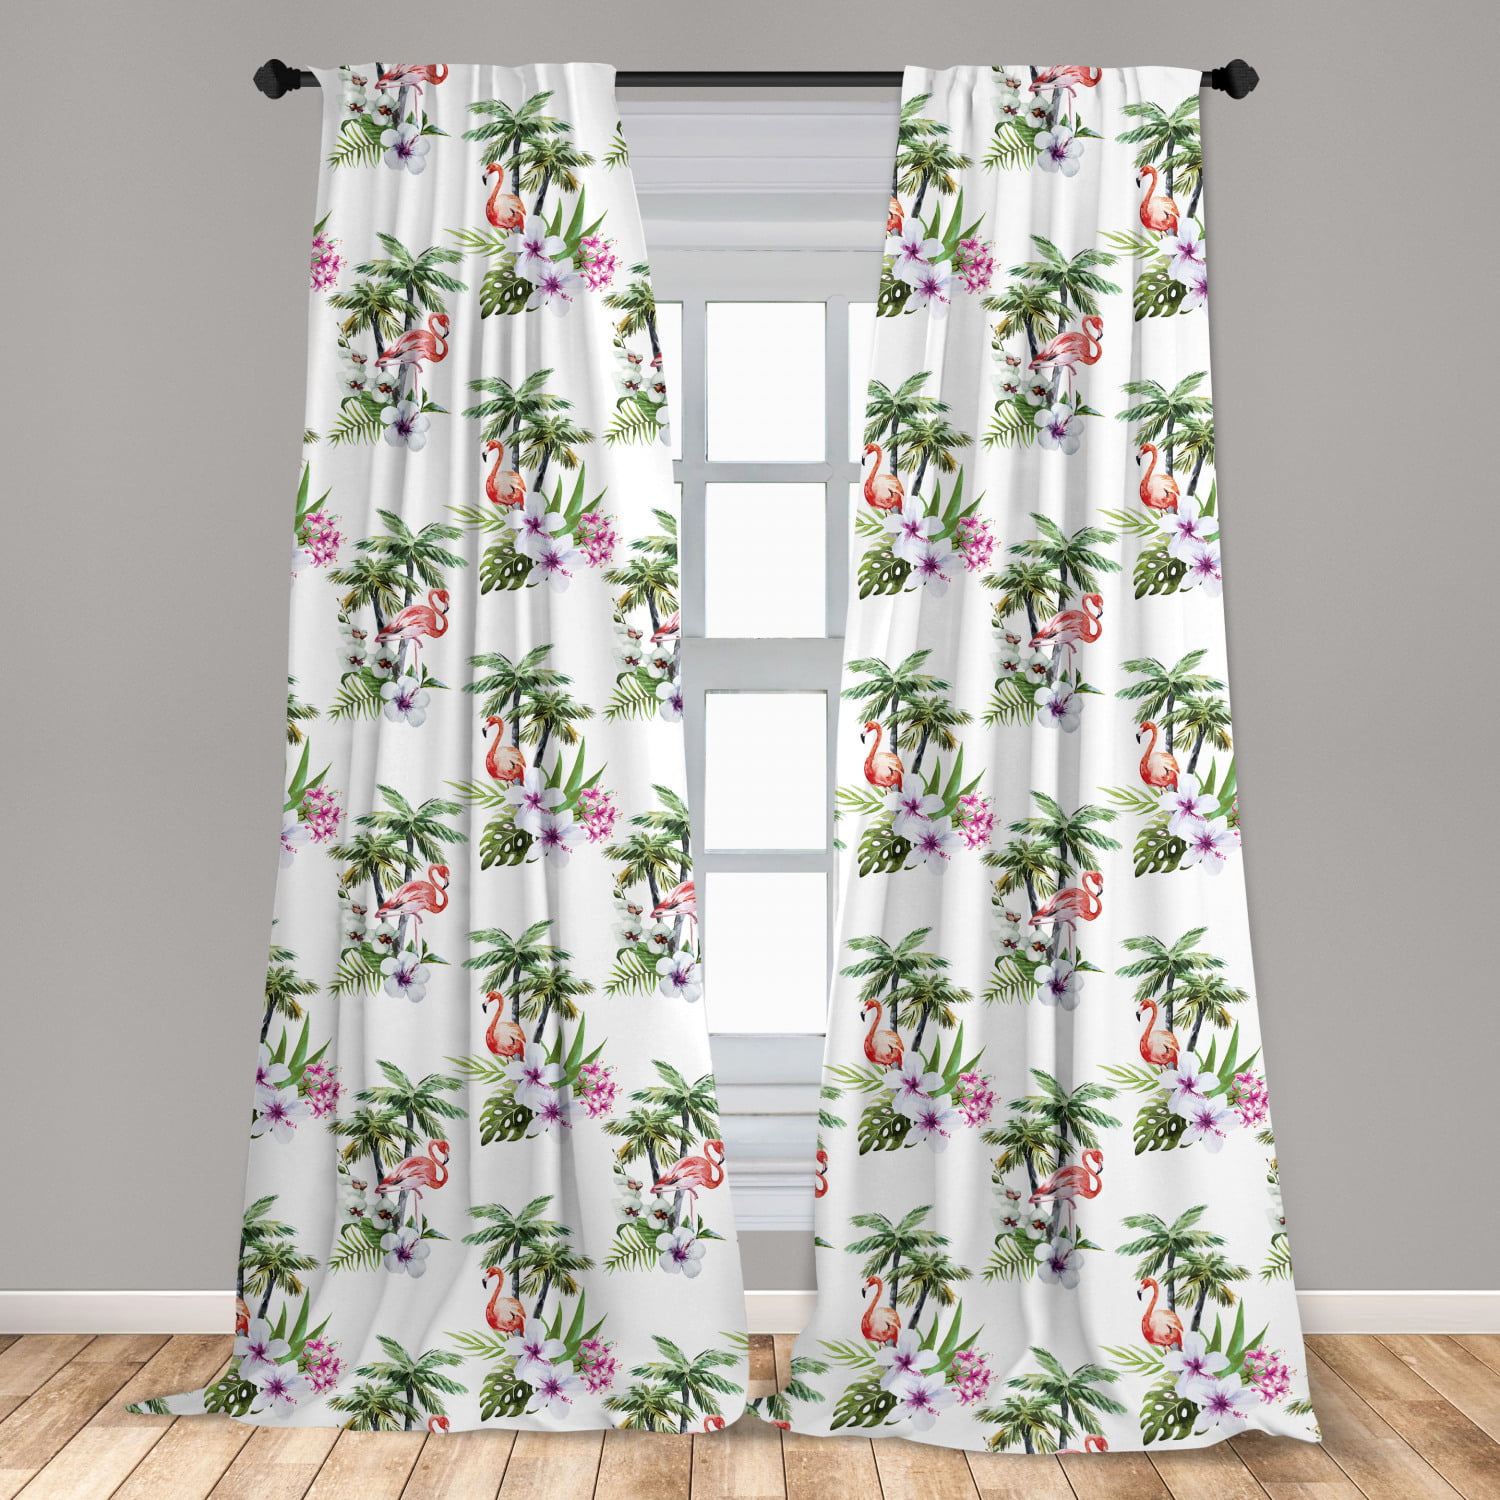 Flamingos and Tree Branches Watercolor Window Drapes Kitchen Curtain 2 Panel Set 